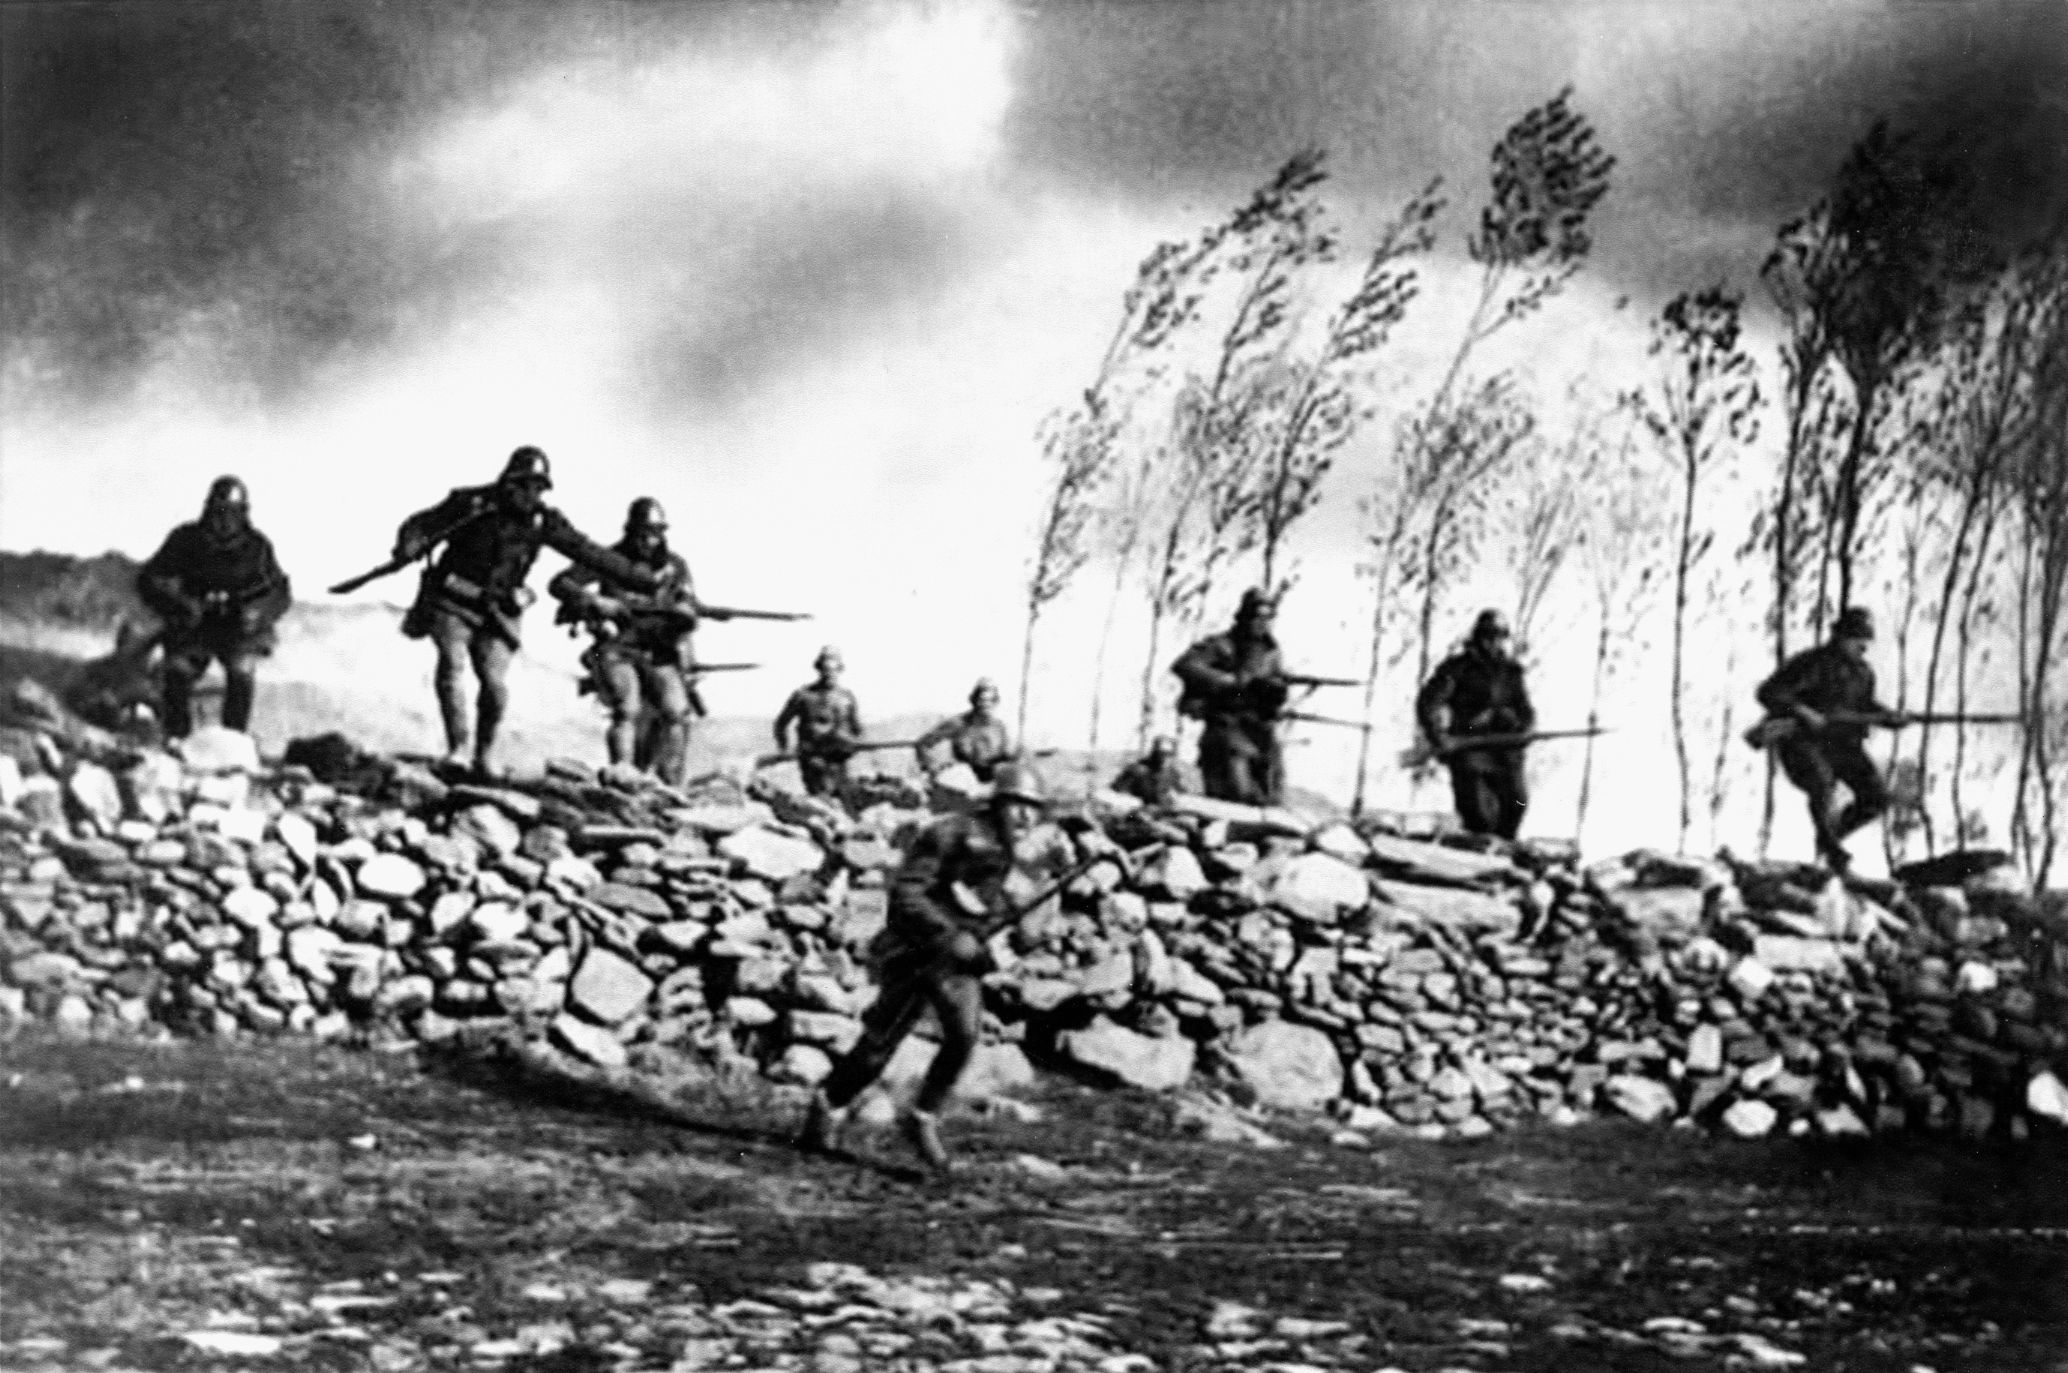 Francisco Franco’s Nationalist troops mount a fresh offensive at Escorial, gaining five miles in a single day. 